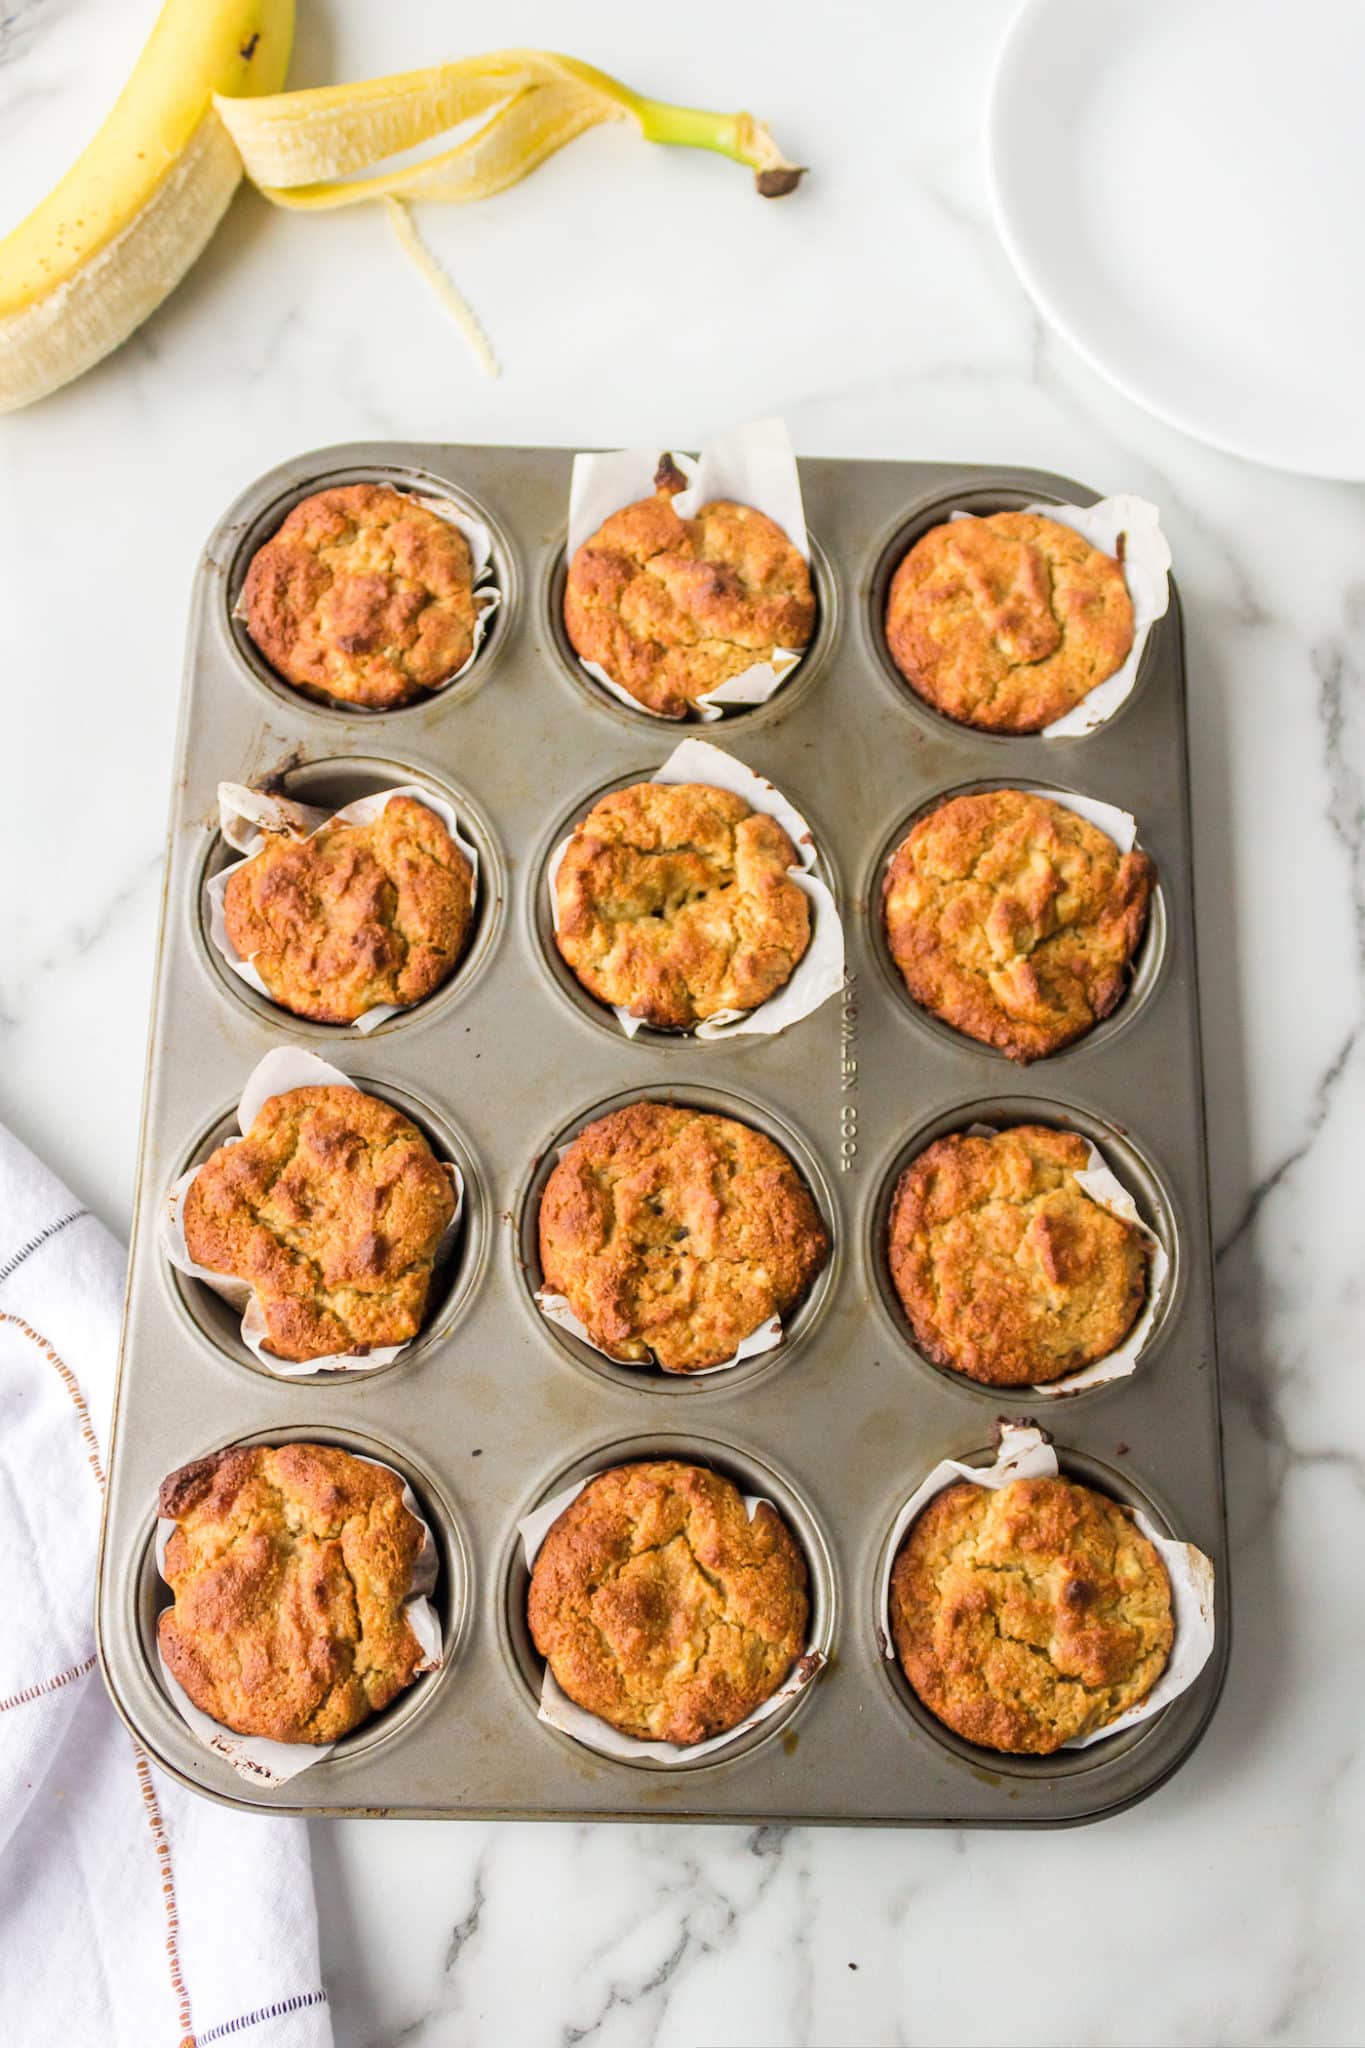 Banana muffins baked in a tin